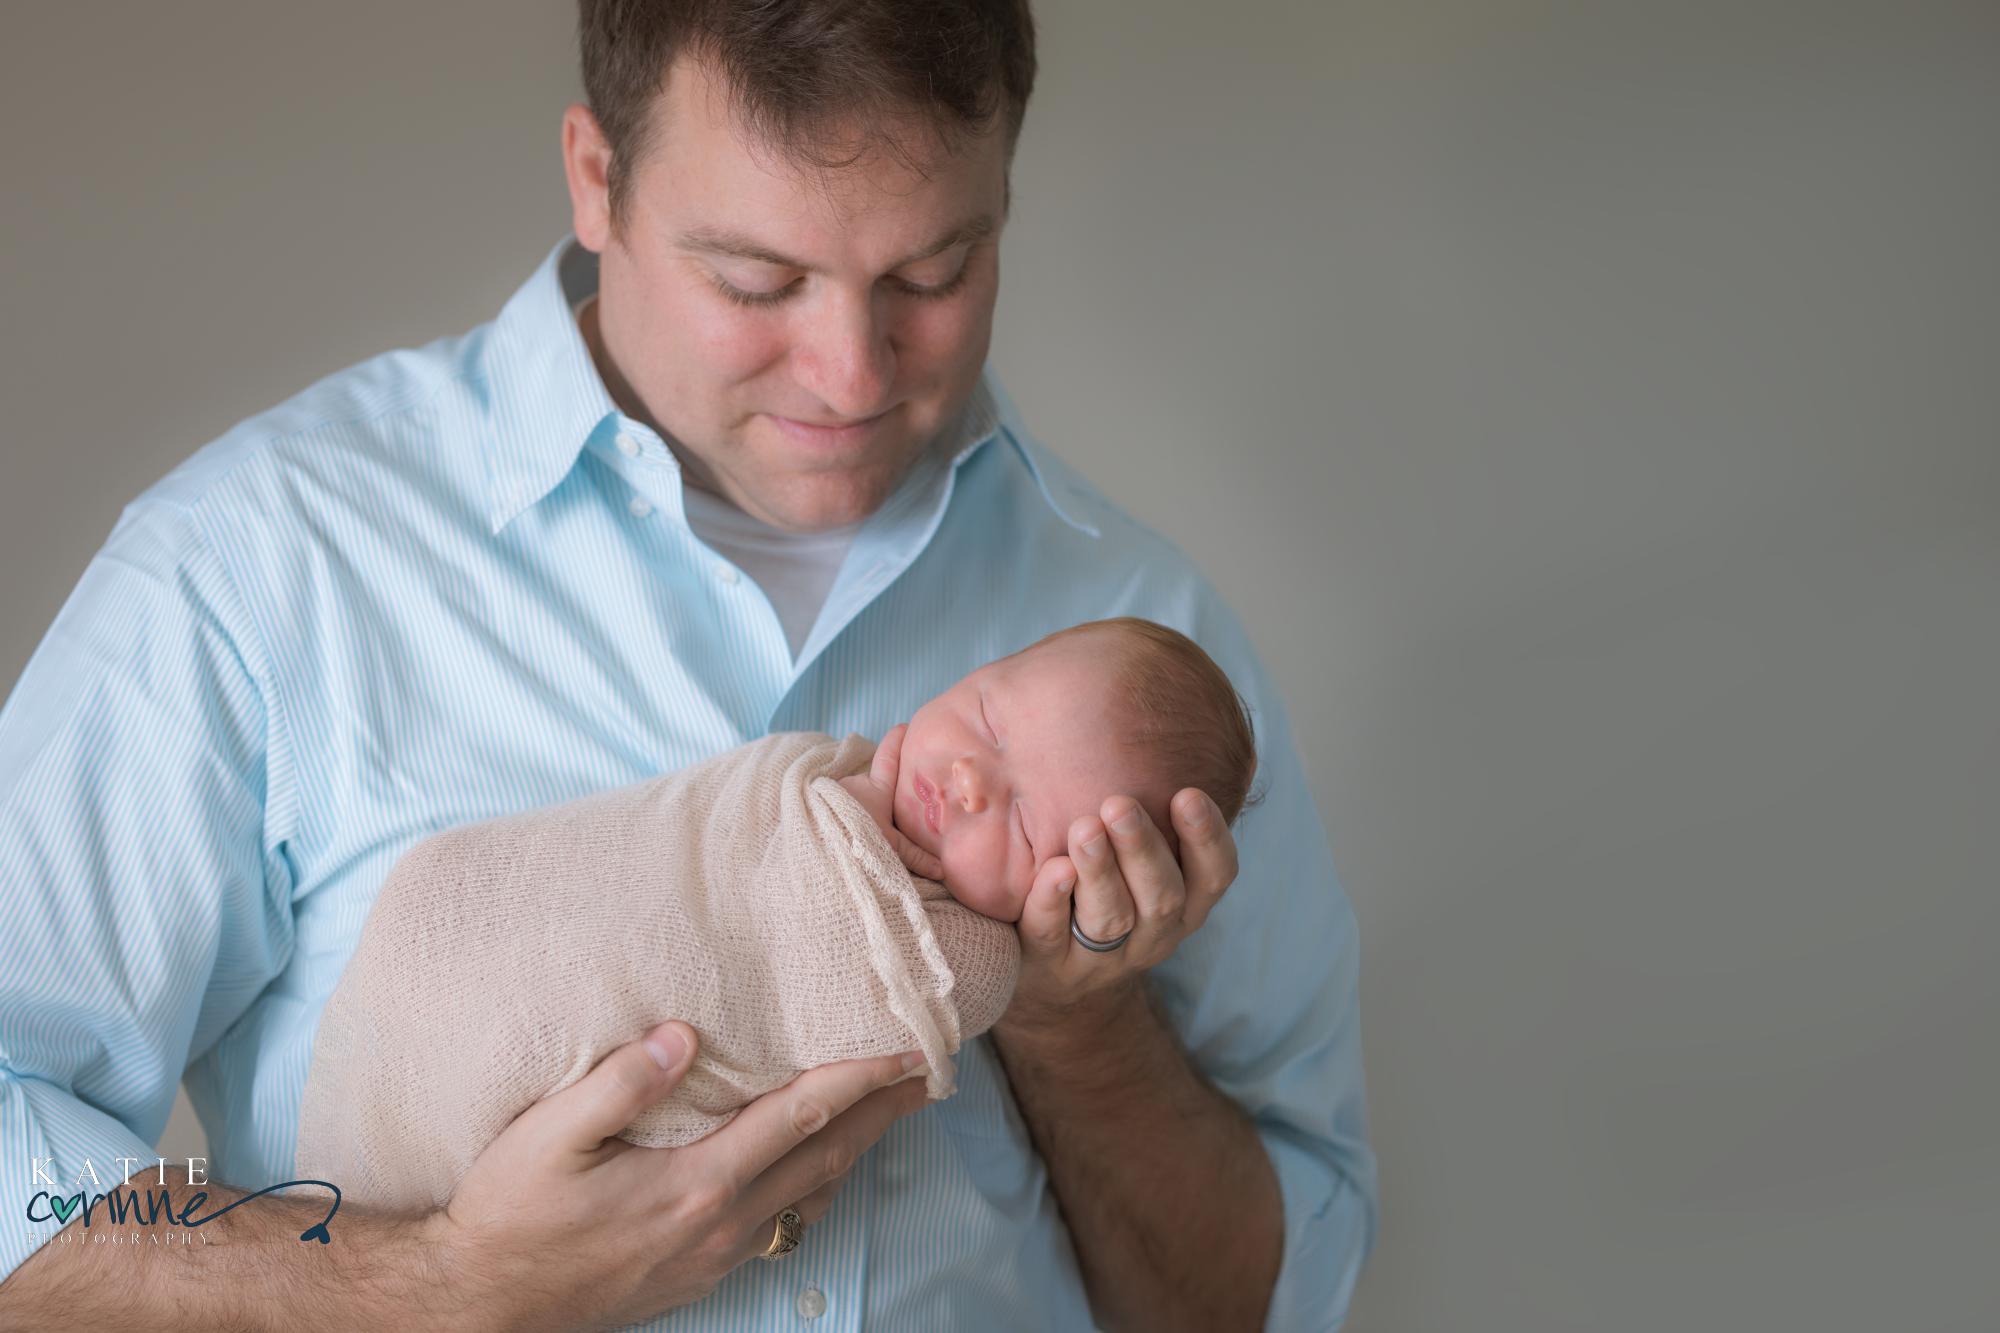 Father looks at newborn baby in mobile photo studio